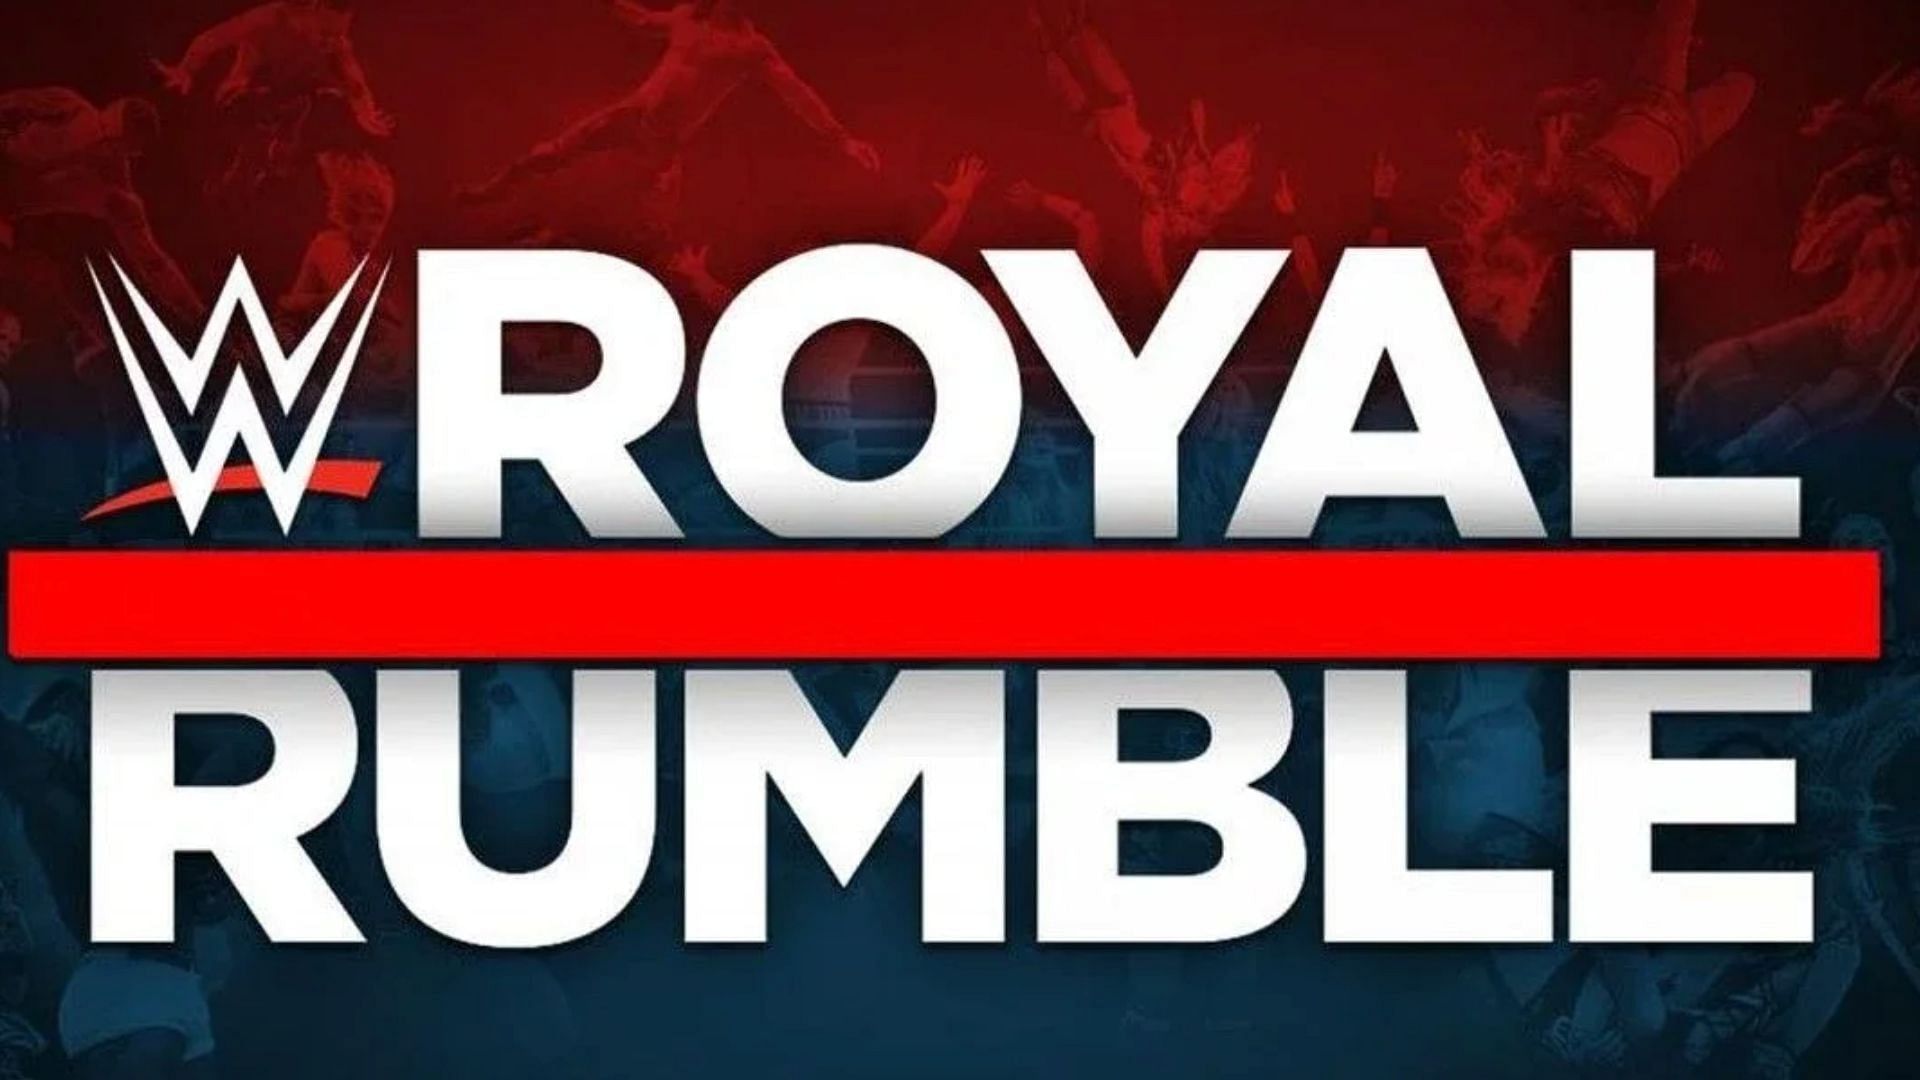 Update on ticket sales for WWE Royal Rumble 2023